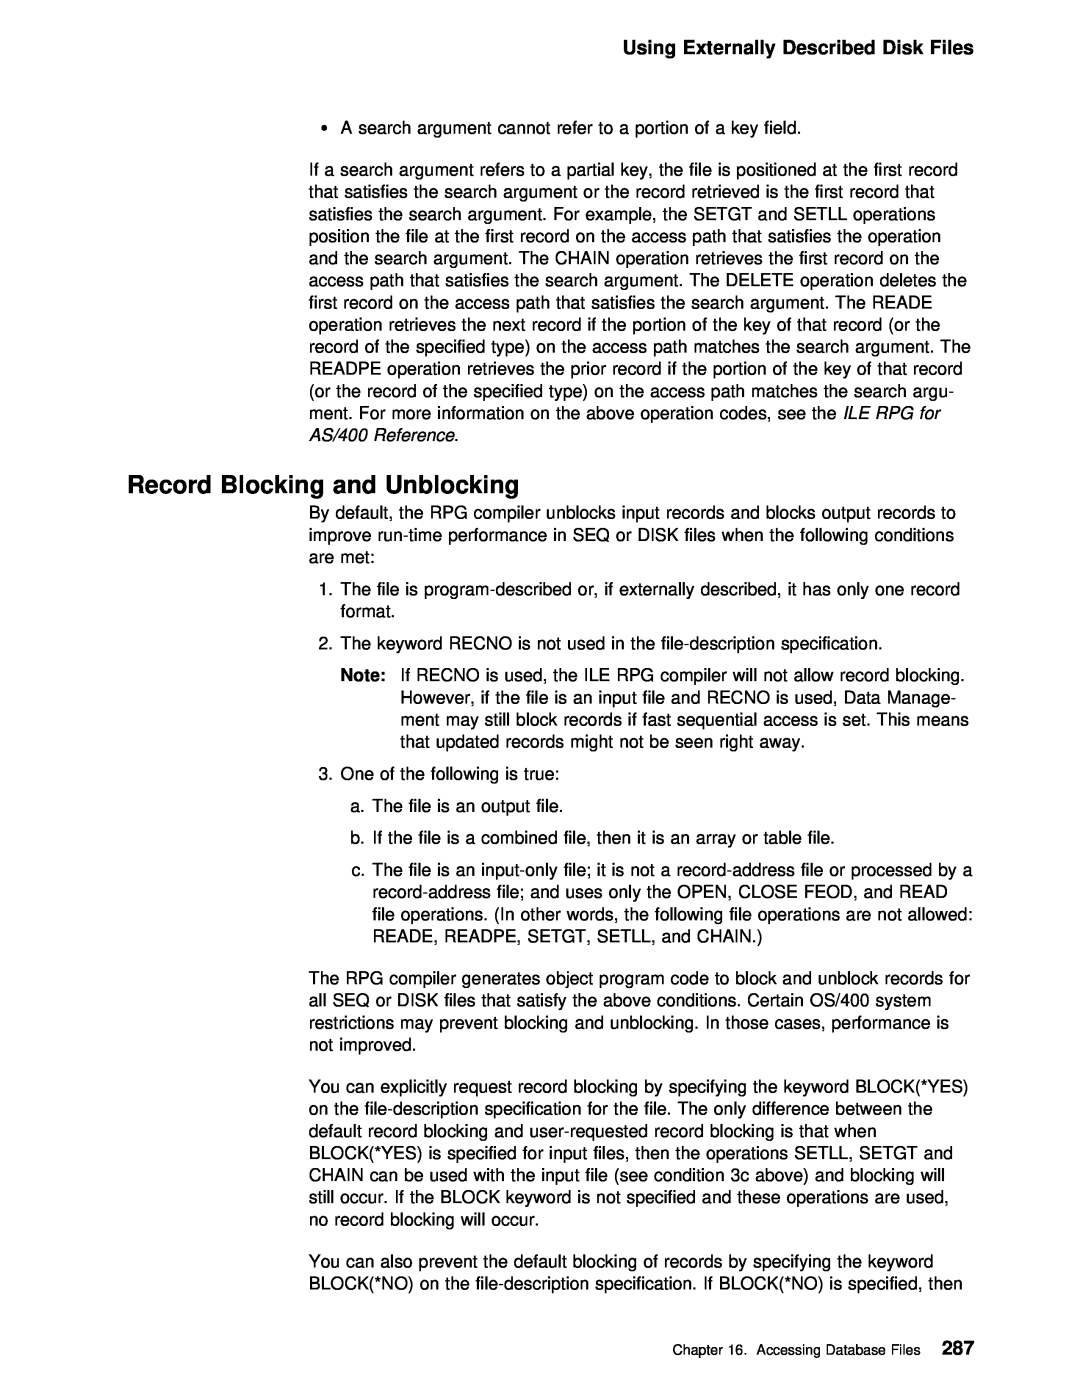 IBM AS/400 manual Record Blocking and Unblocking, ¹ A, Using Externally Described Disk Files 